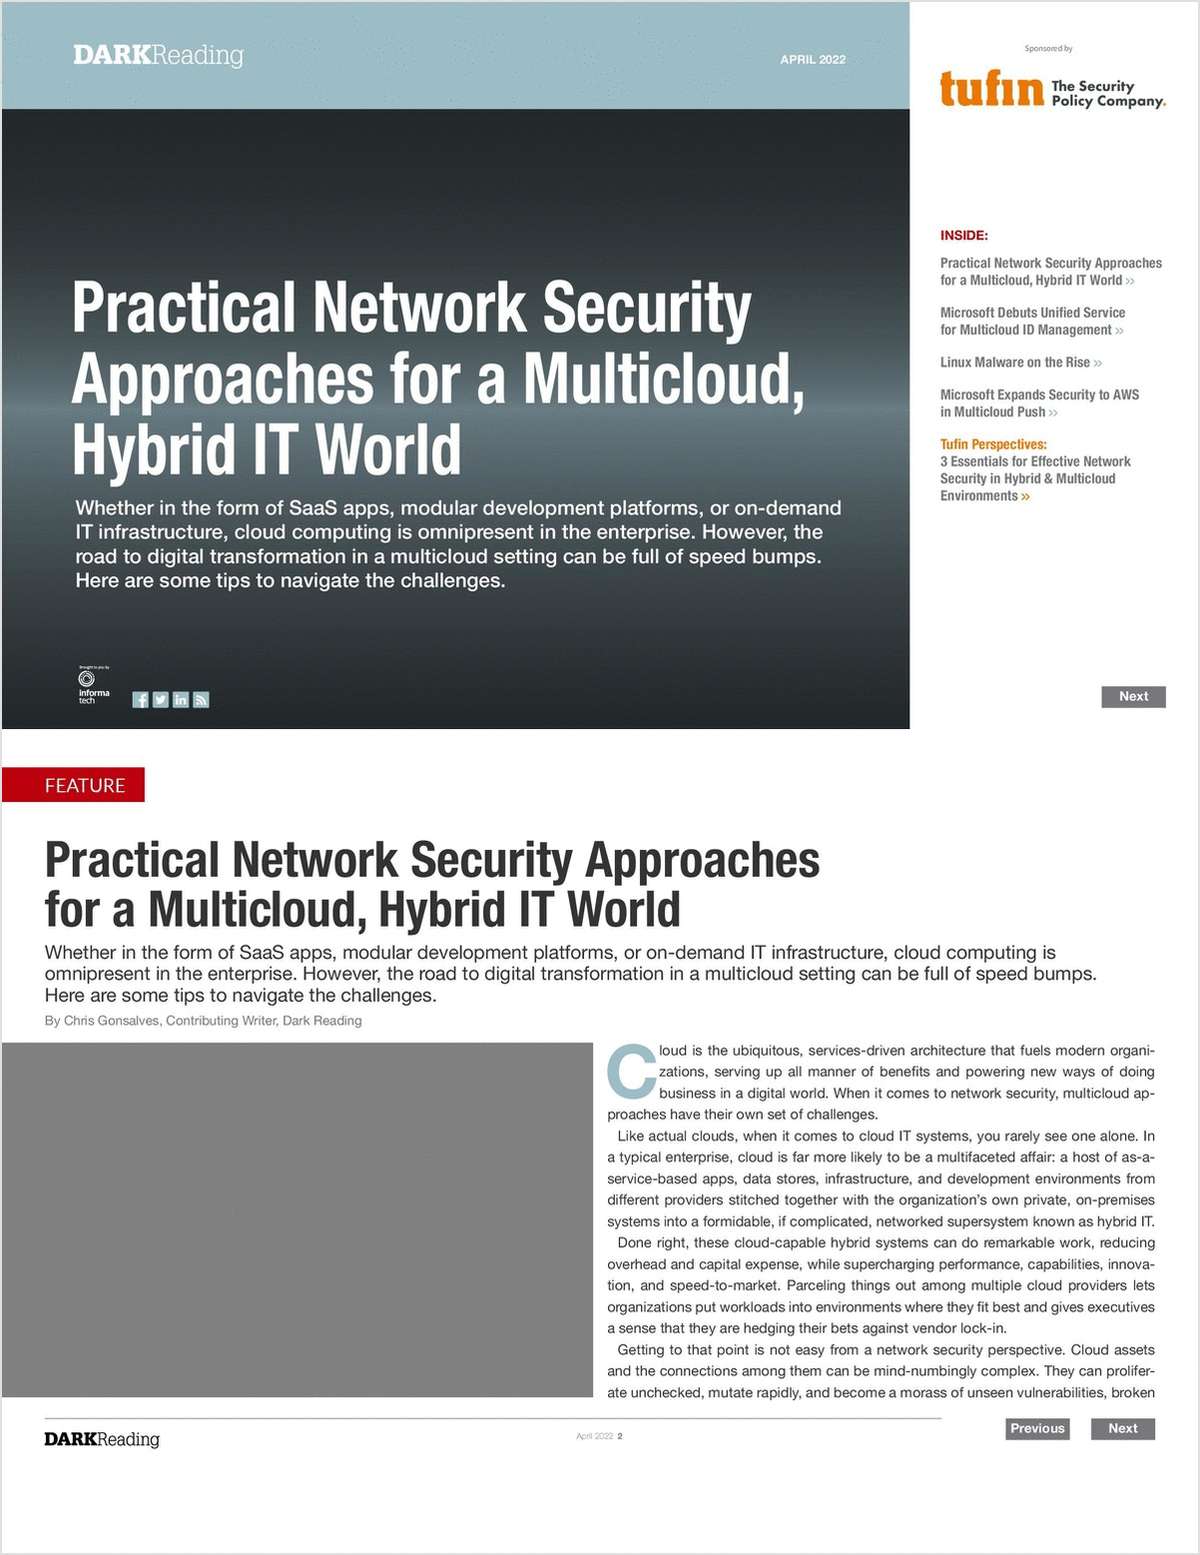 Practical Network Security Approaches for a Multicloud, Hybrid IT World